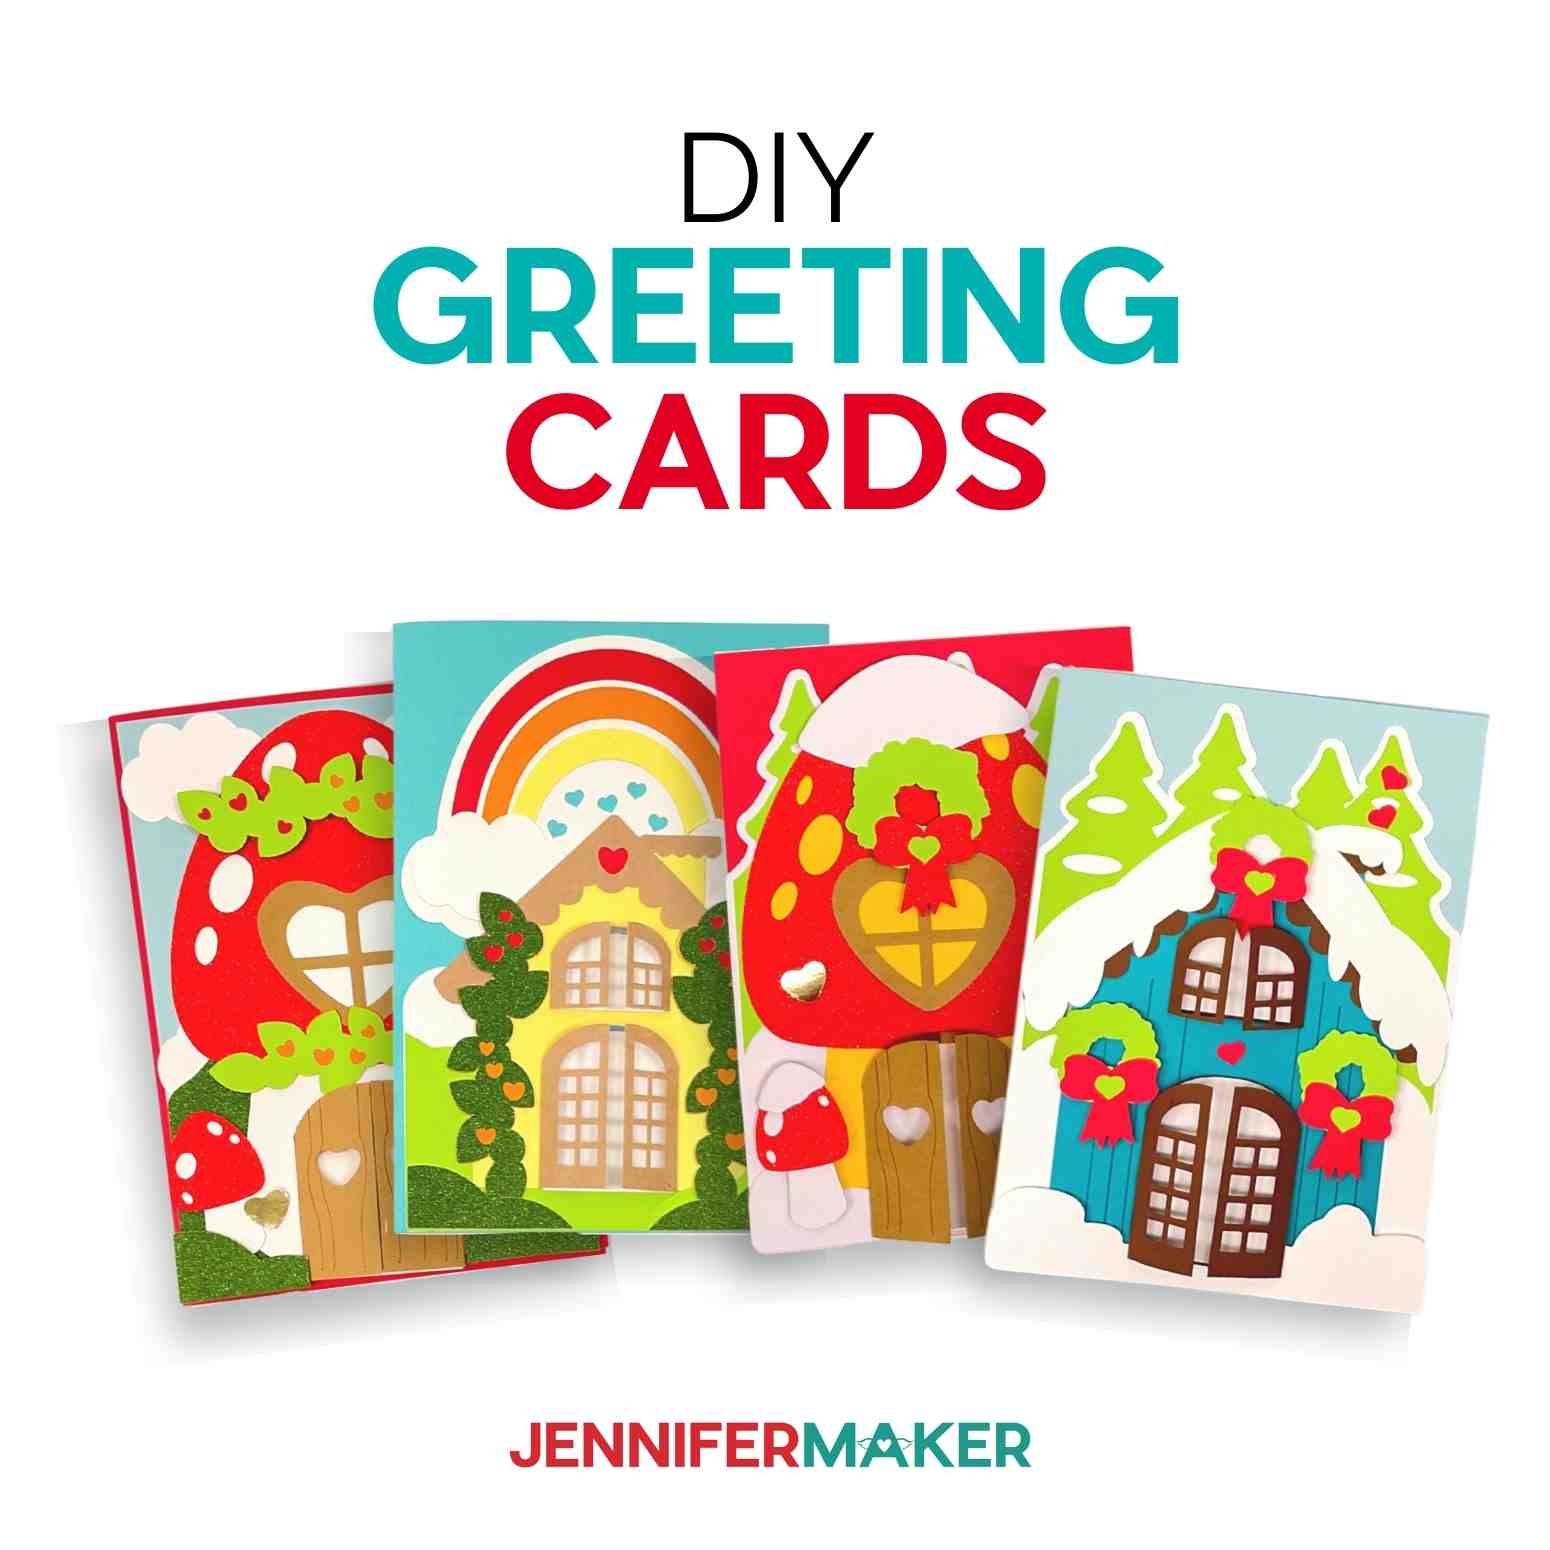 Four DIY Greeting cards for any occasion